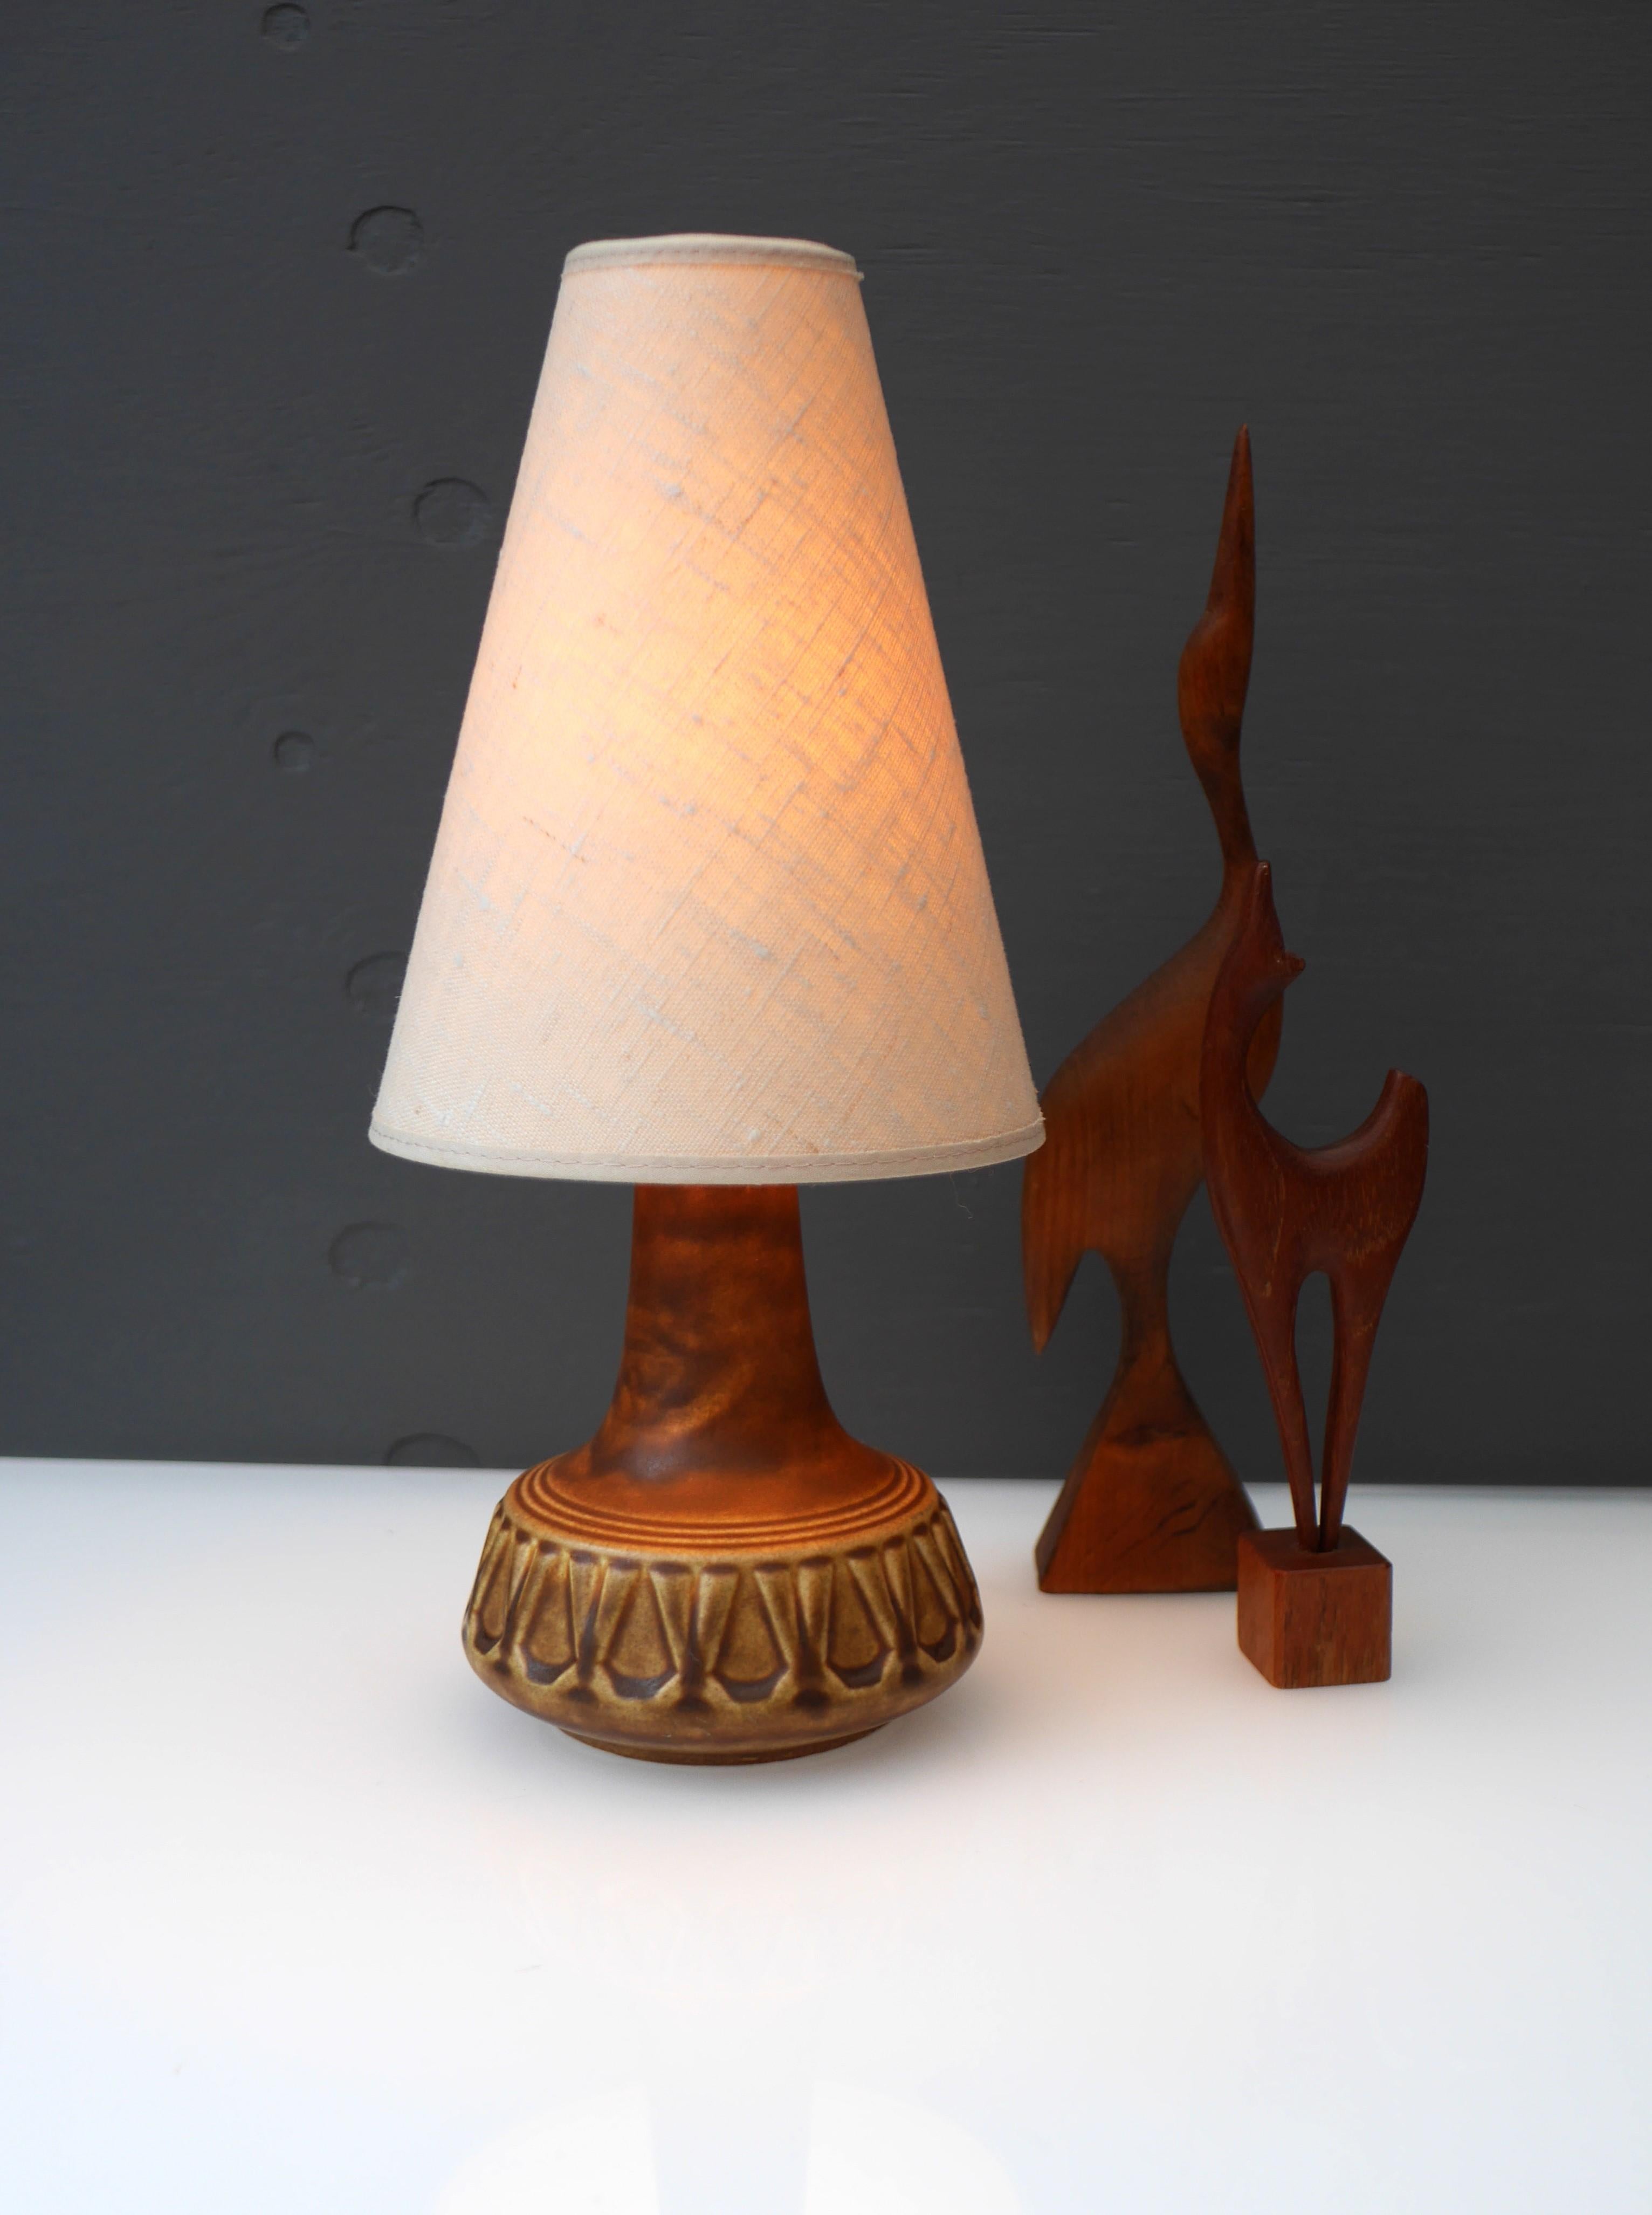 Hand-Crafted Mid-century modern pottery table lamp from Söholm, Denmark.  For Sale